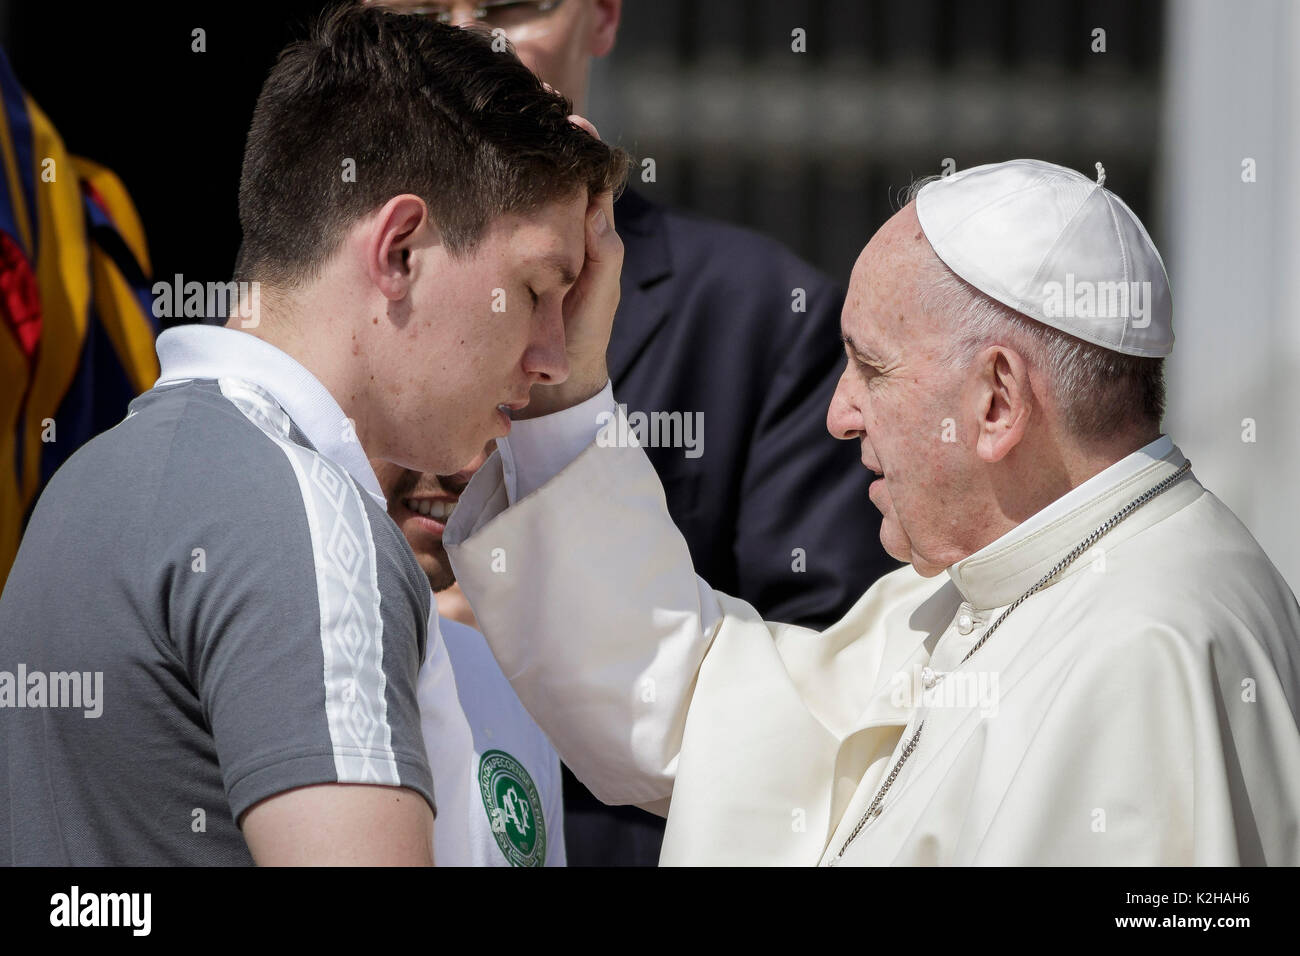 Vatican City, Vatican. 30th Aug, 2017. Pope Francis blesses soccer players Jackson Follmann), who survived when the plane carrying Brazilian soccer team Chapecoense crashed, during his Weekly General Audience in St. Peter's Square in Vatican City, Vatican on August 30, 2017. Pope Francis on Wednesday appealed for “a respectful and responsible attitude towards Creation” ahead of the third World Day of Prayer for the Care of Creation. Credit: Giuseppe Ciccia/Pacific Press/Alamy Live News Stock Photo